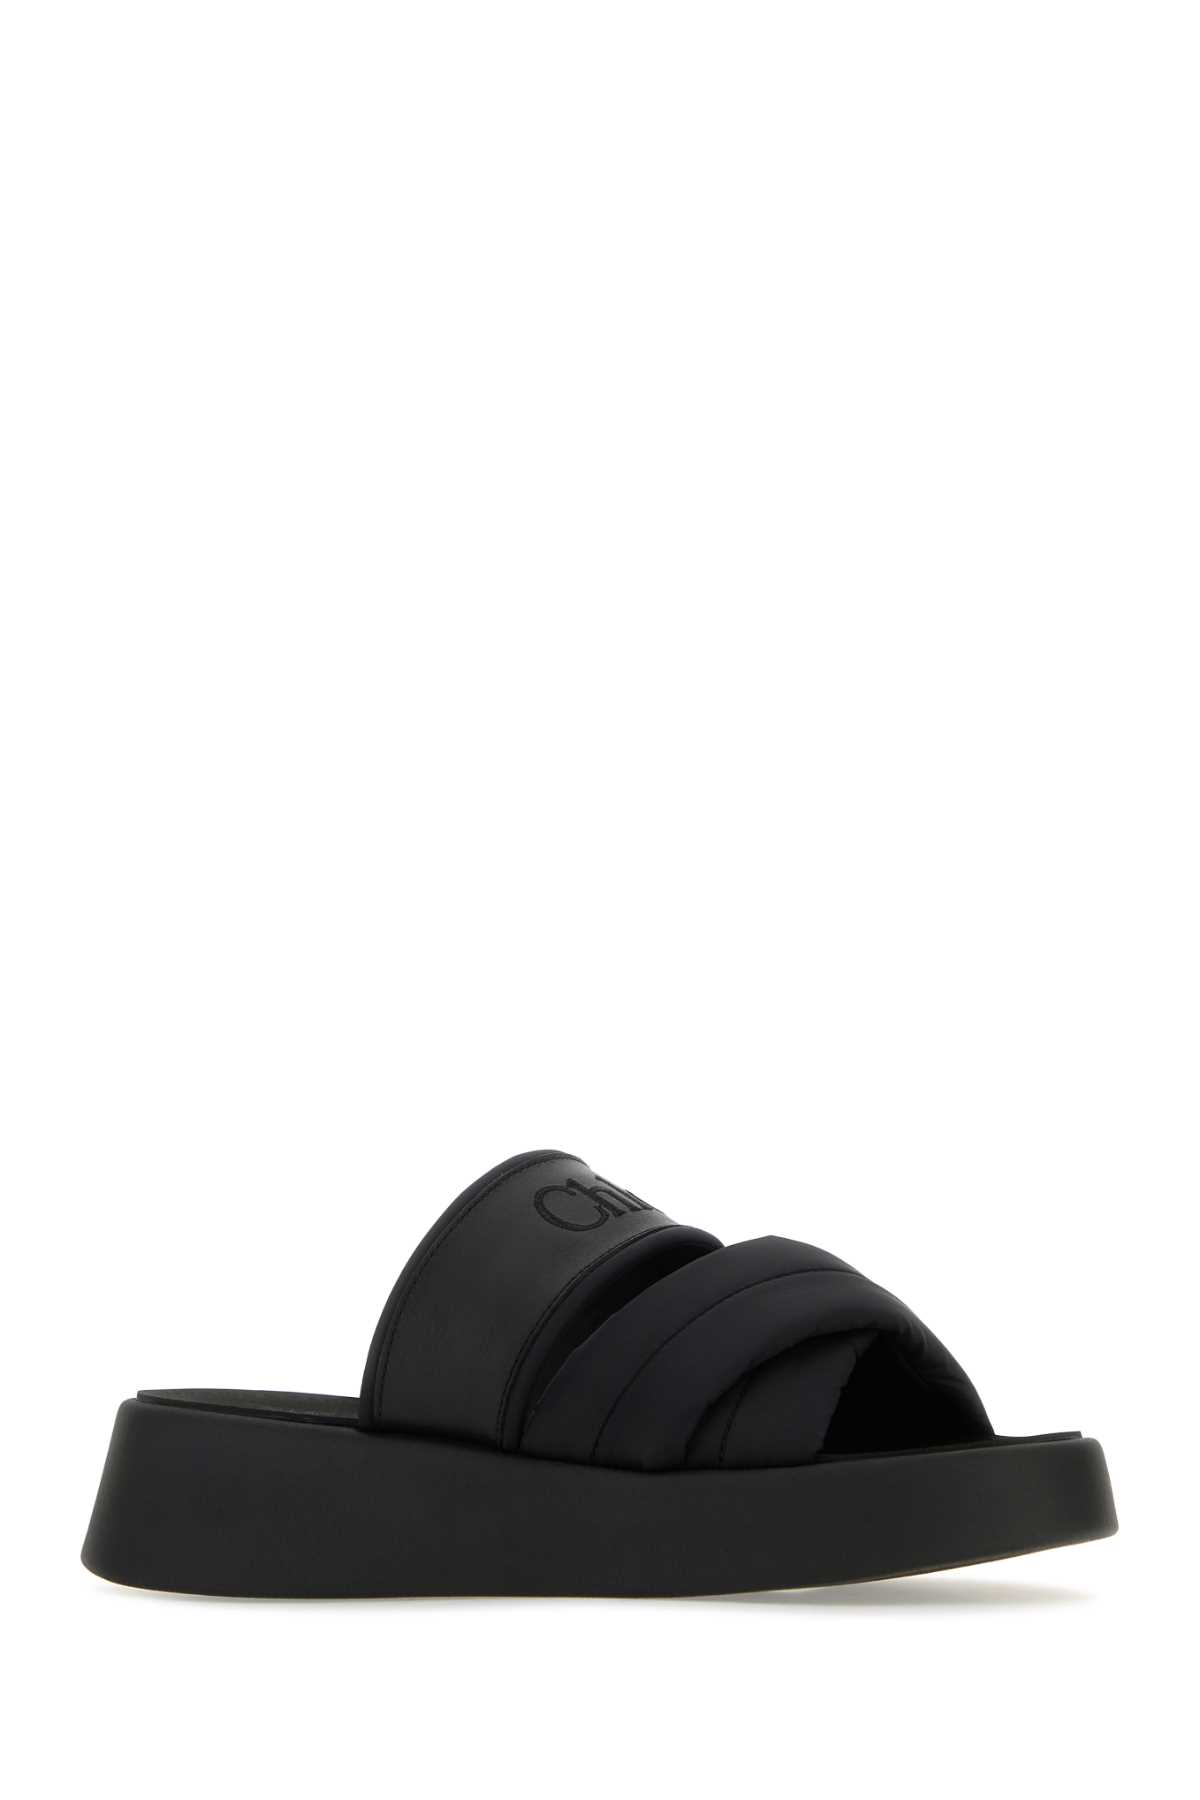 Shop Chloé Black Fabric And Leather Mila Slippers